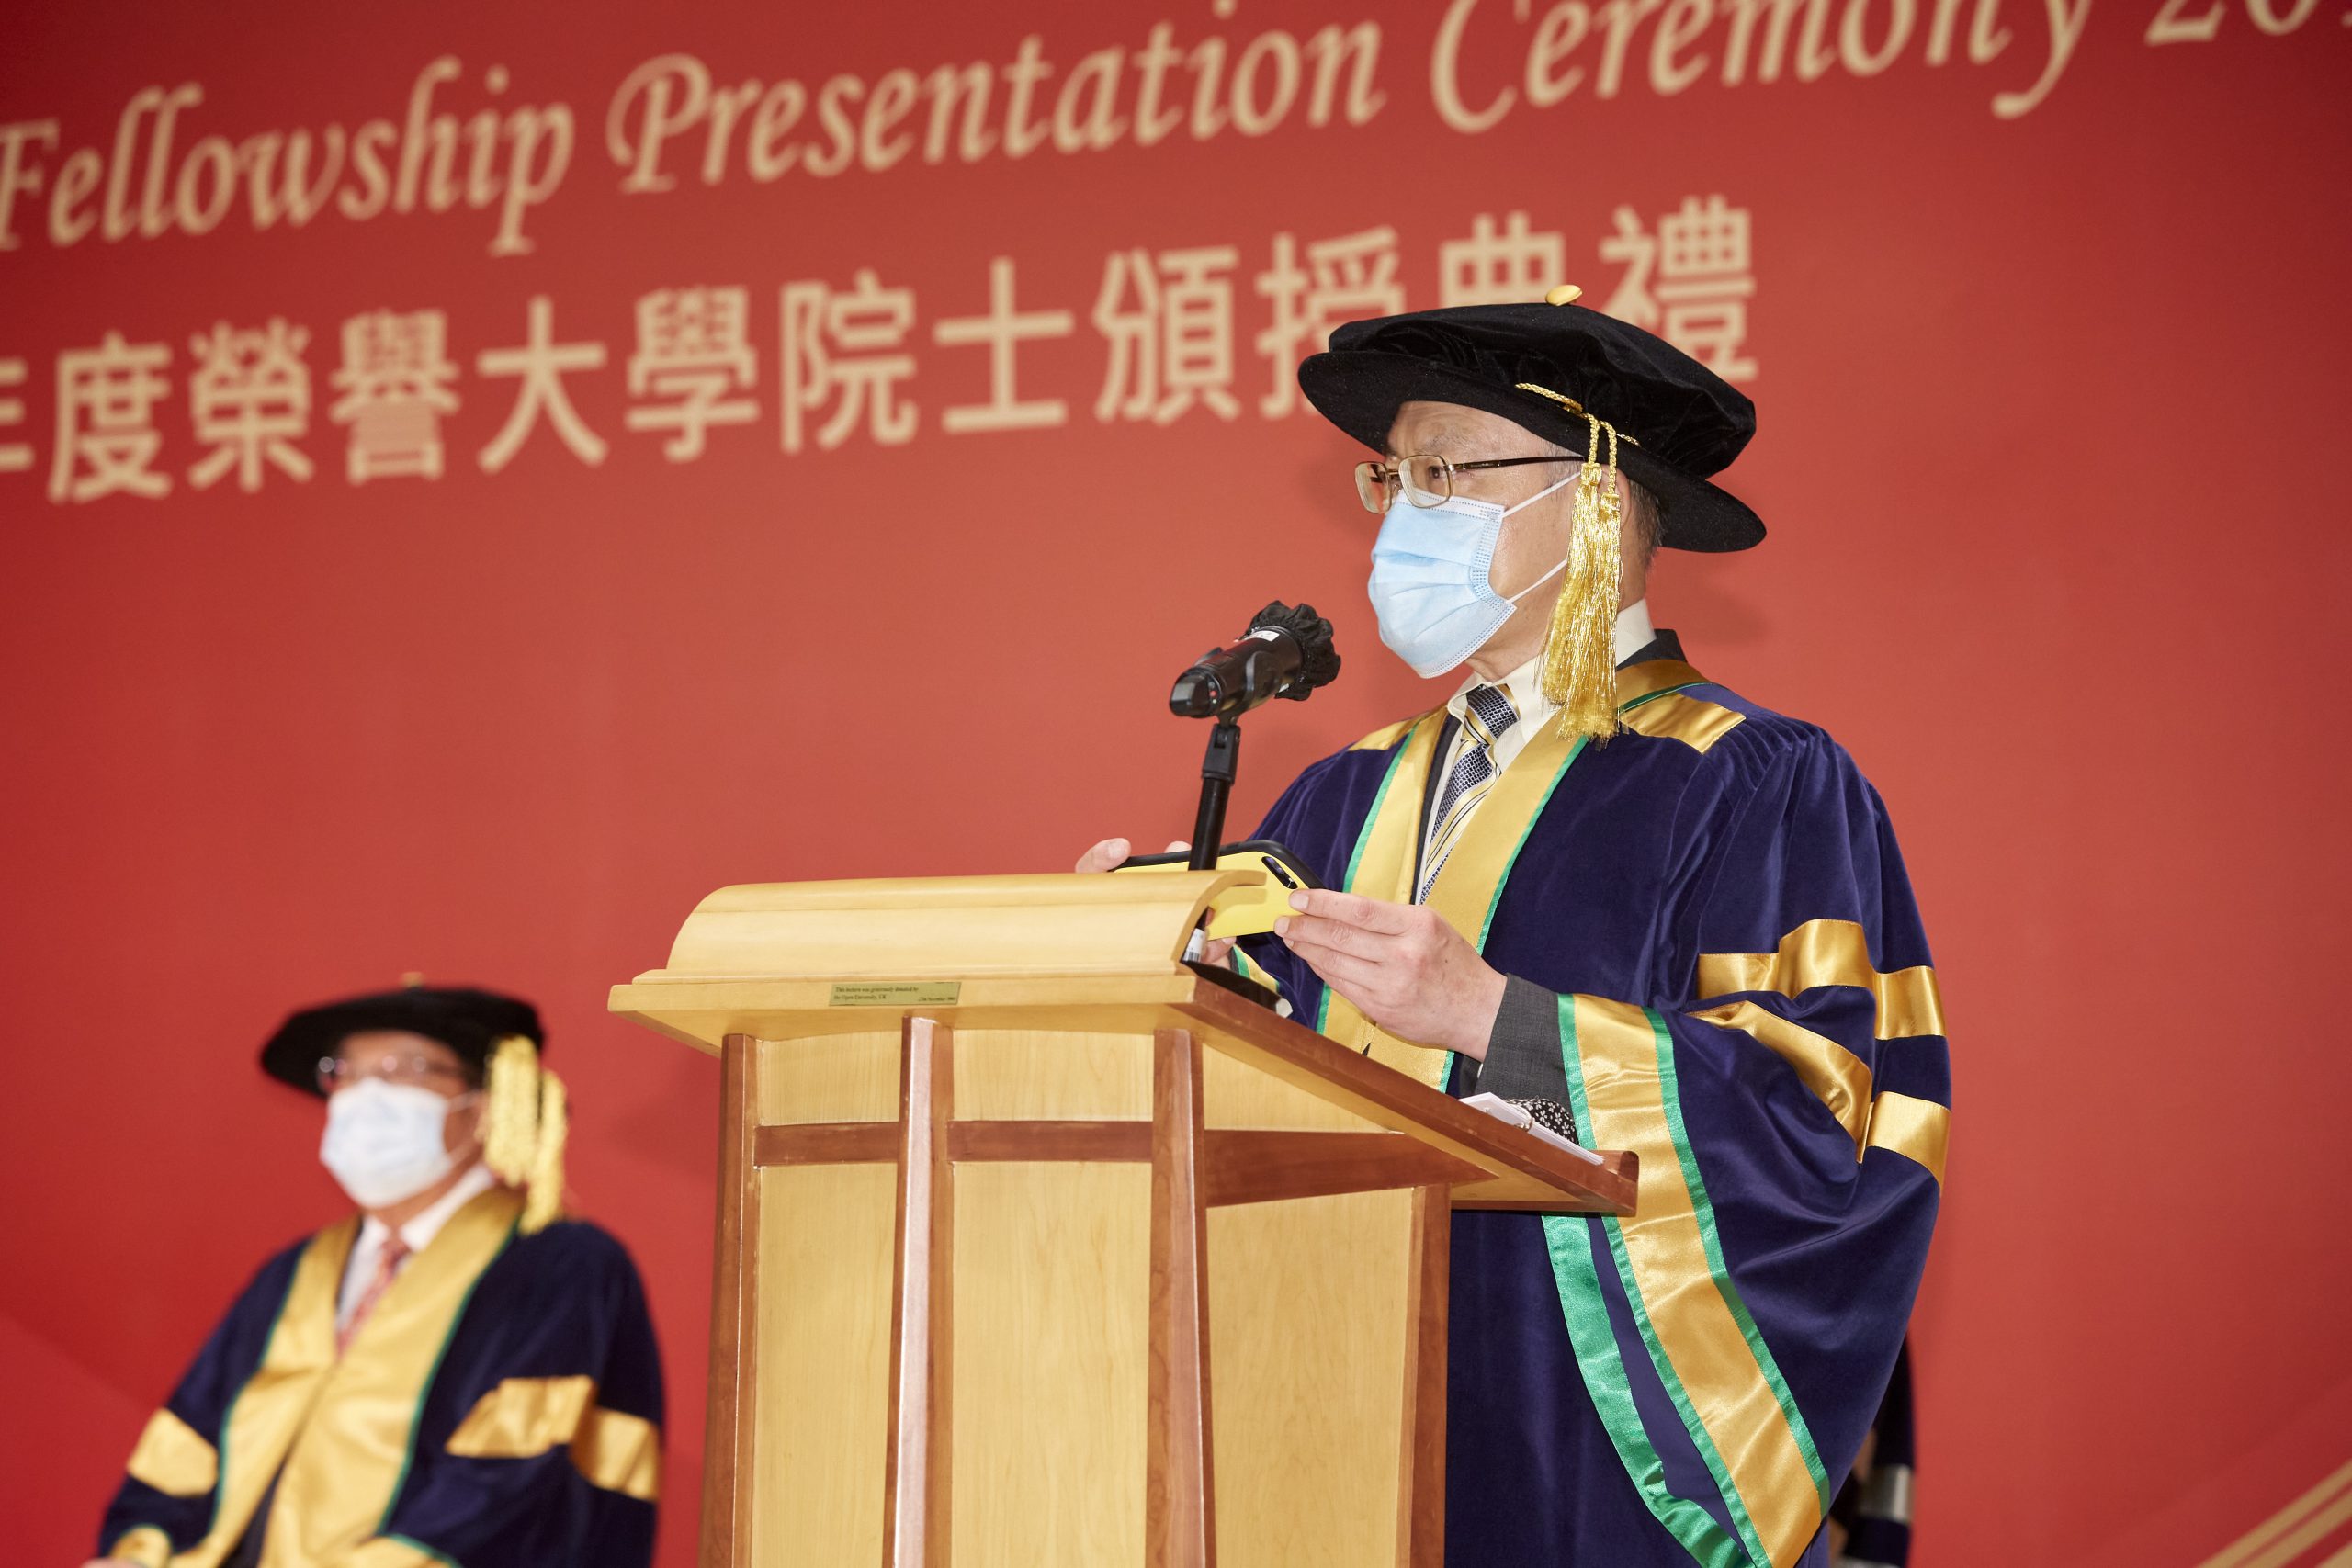 Speaking at the ceremony, Chairman of the Council Mr Michael Wong lauds the four Honorary Fellowship recipients for their remarkable achievements on various fronts as well as their dedicated service in education and in supporting the University.